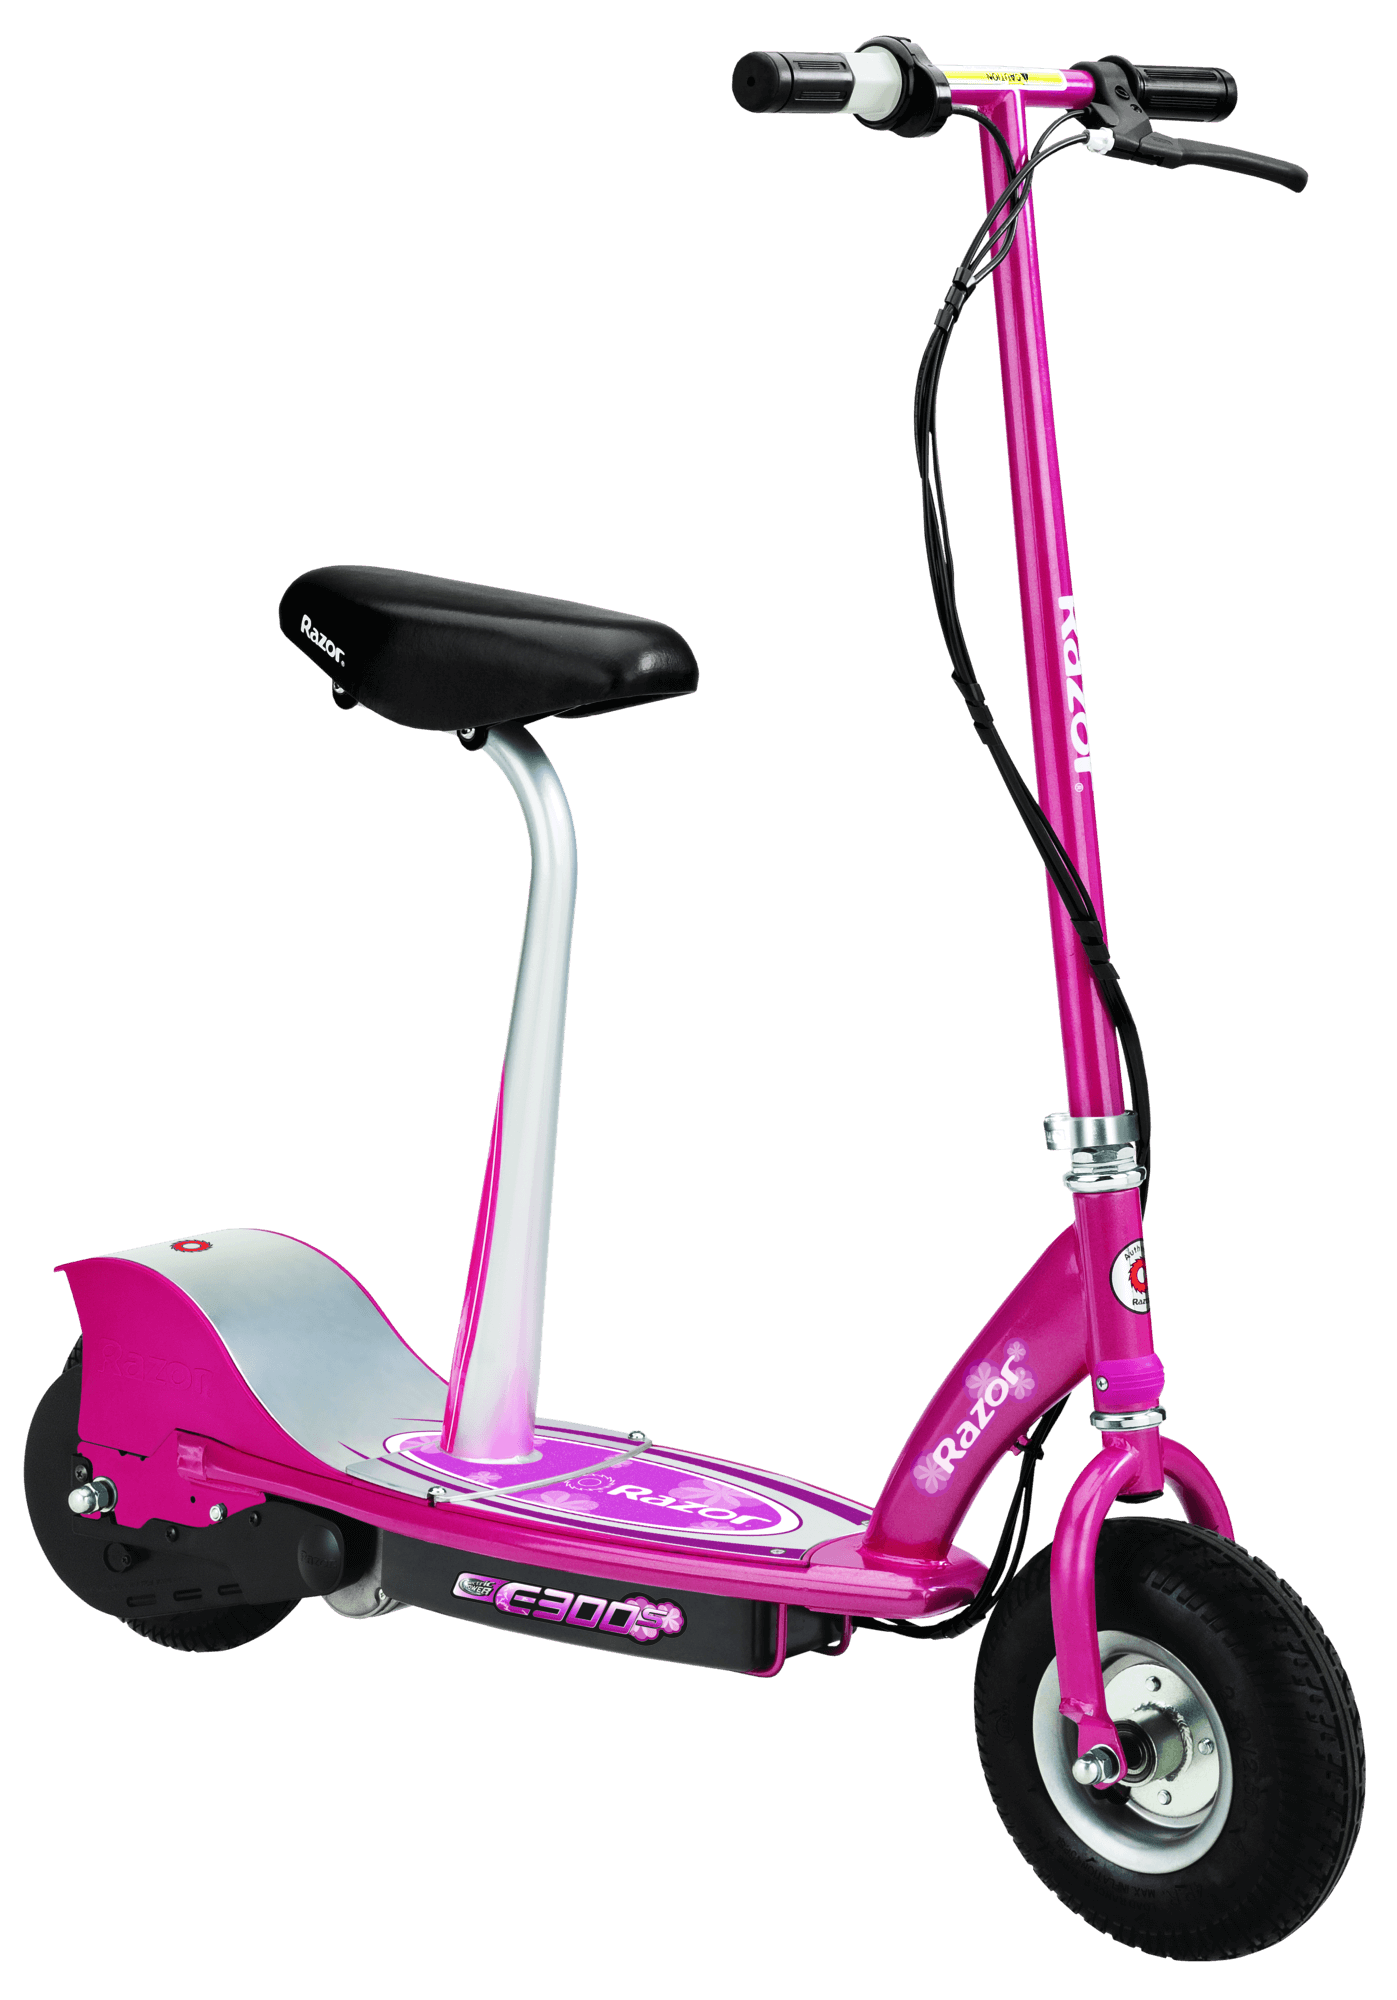 Pink Razor electric scooter with a seat for kids.